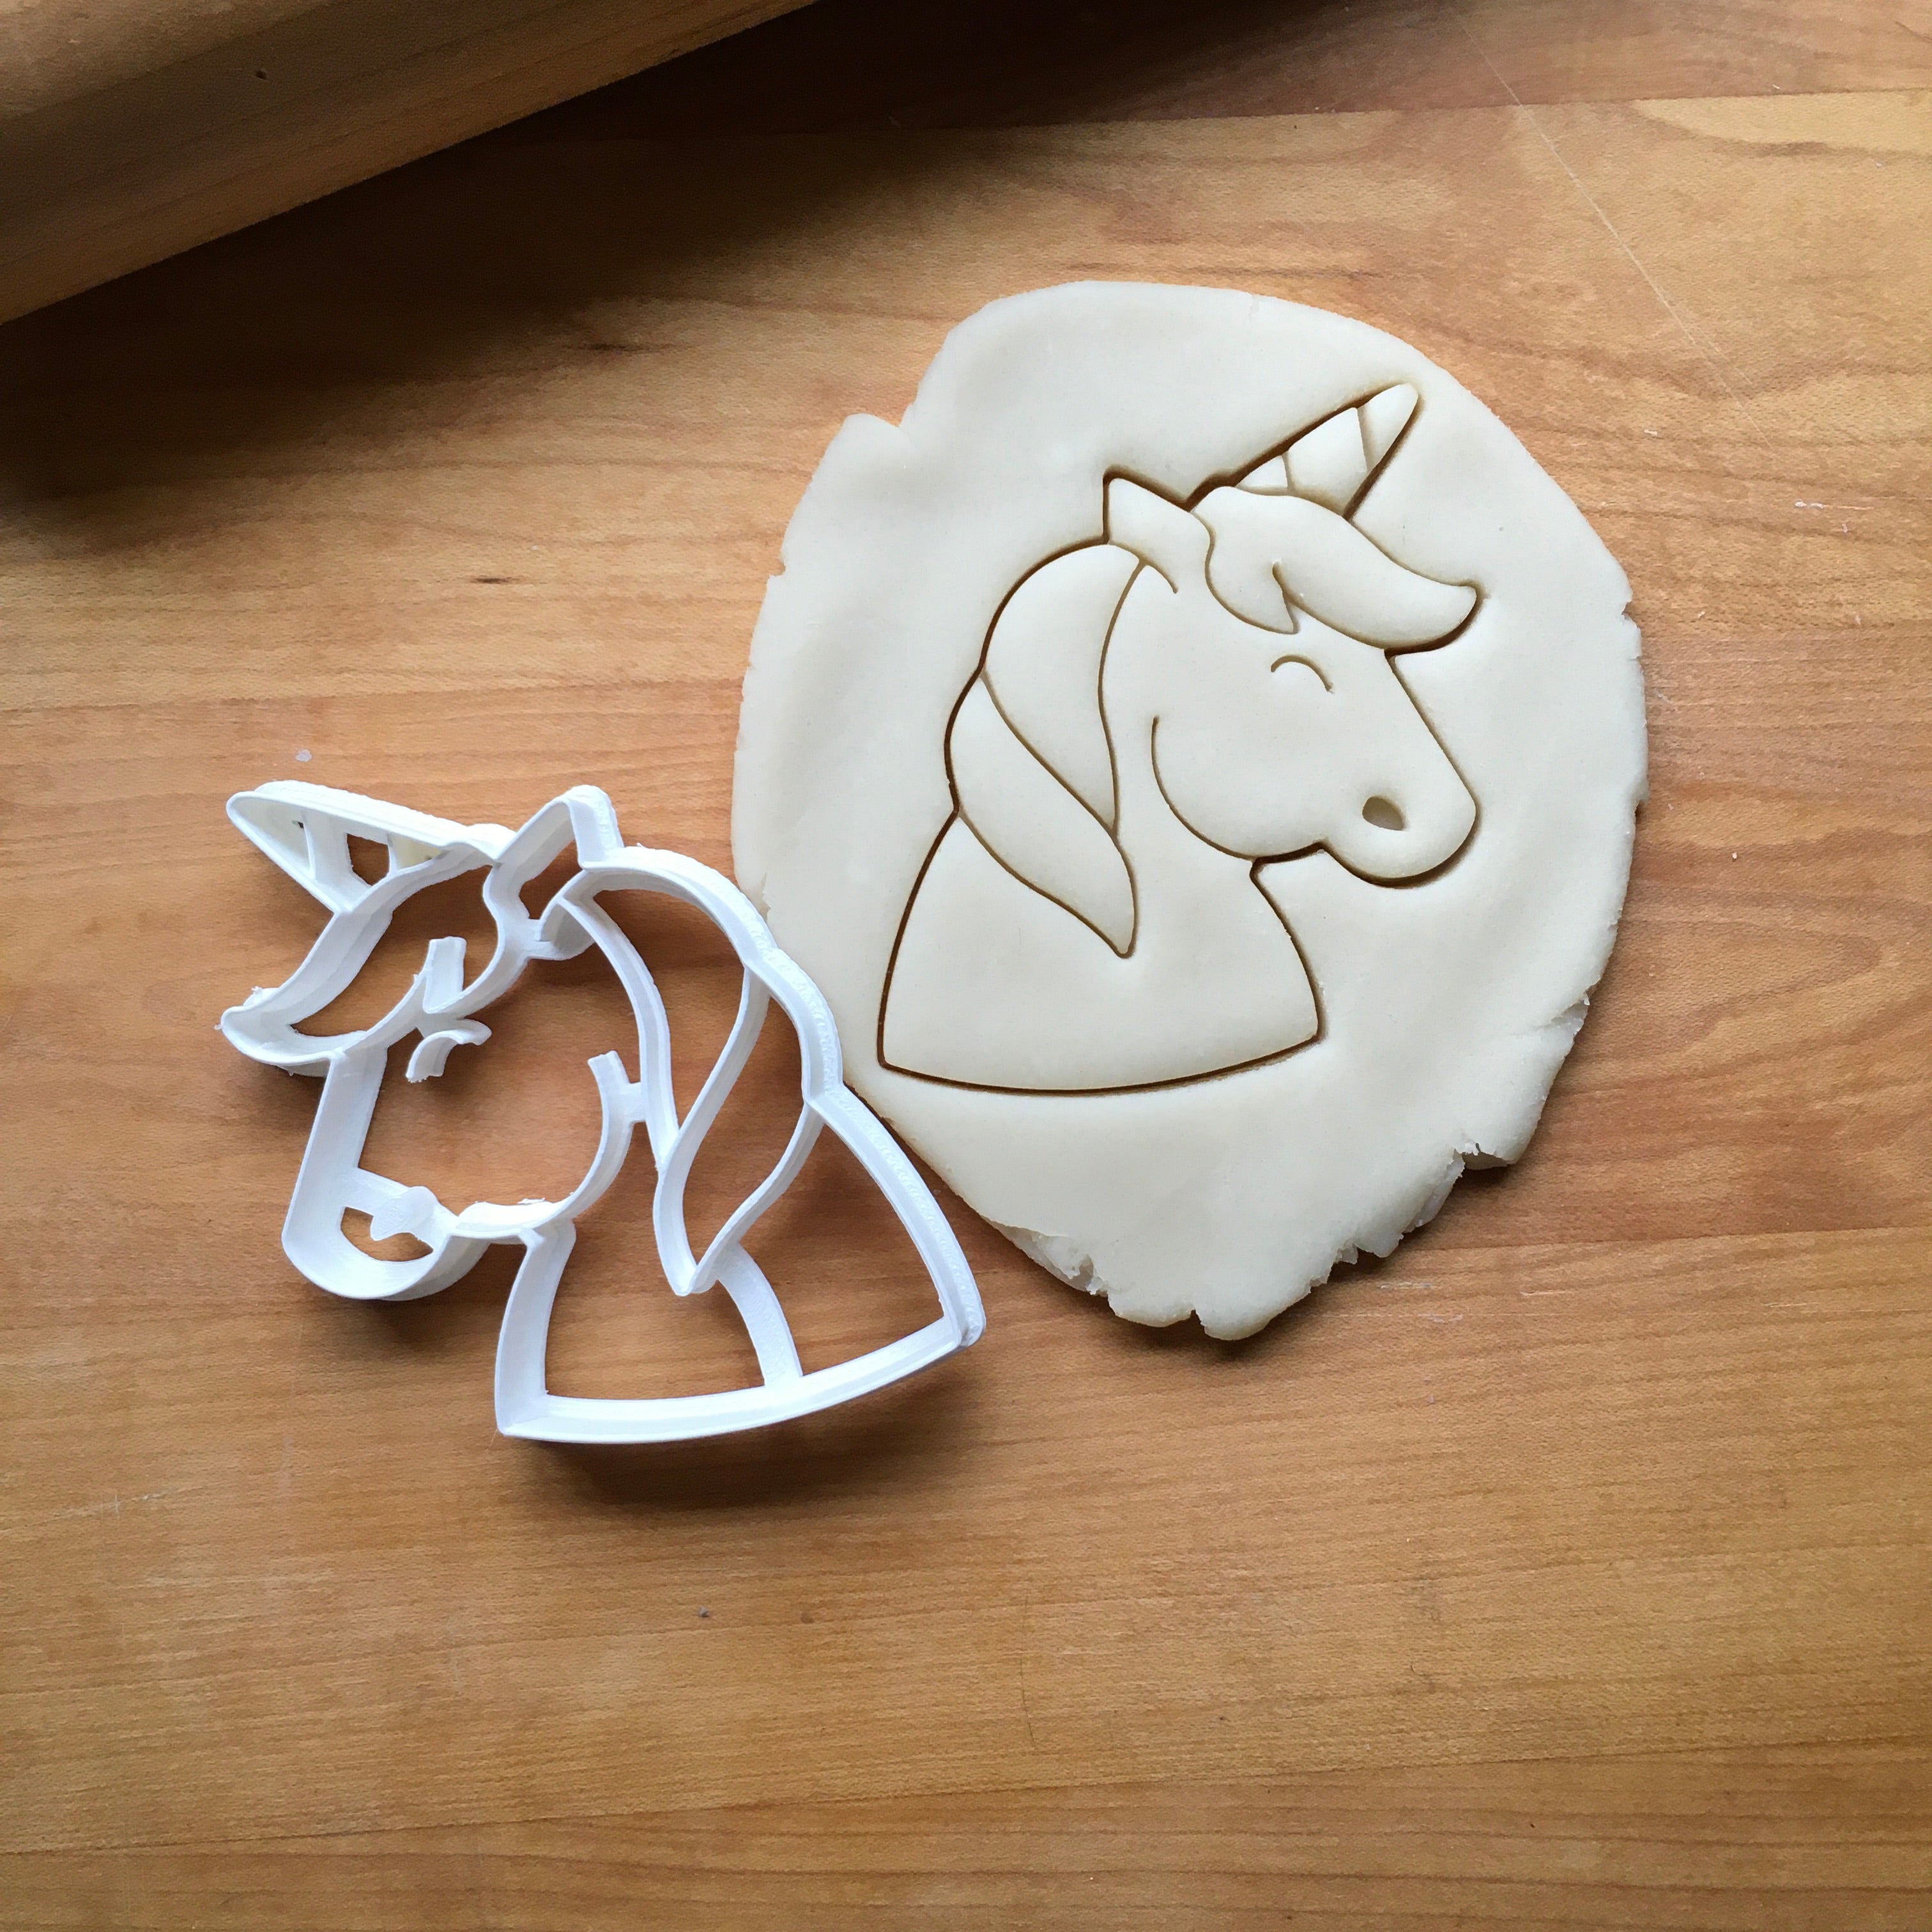 Unicorn number cookie cutter – Sweet4ucutters